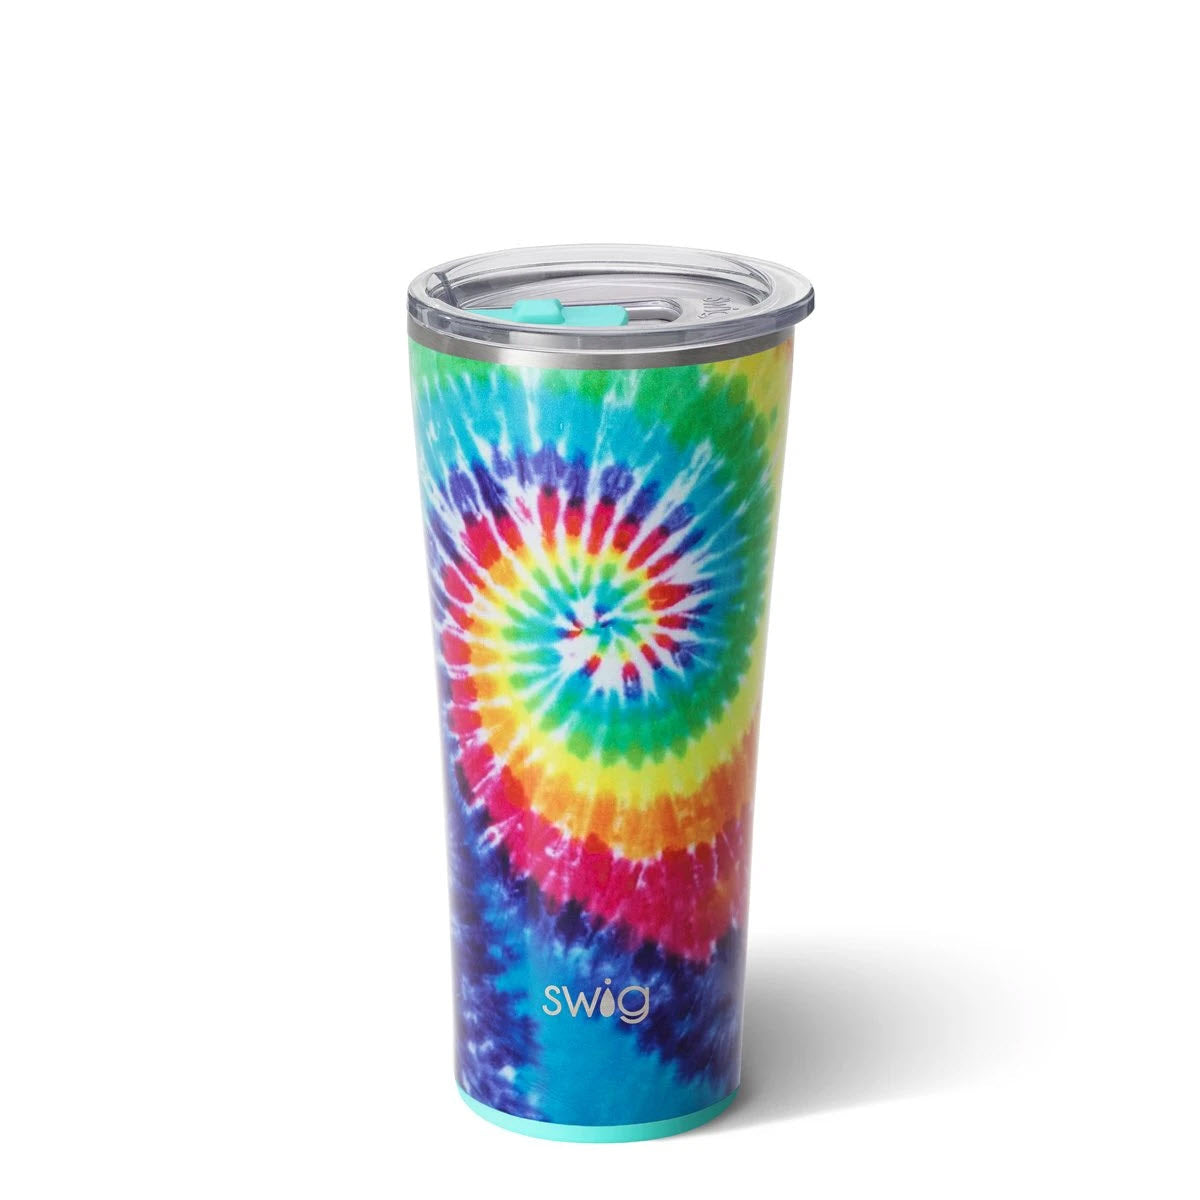 Swig 22 Oz Tumbler in Swirled Peace featuring a colorful tie-dye patterned design with triple insulation technology and comes with a lid.